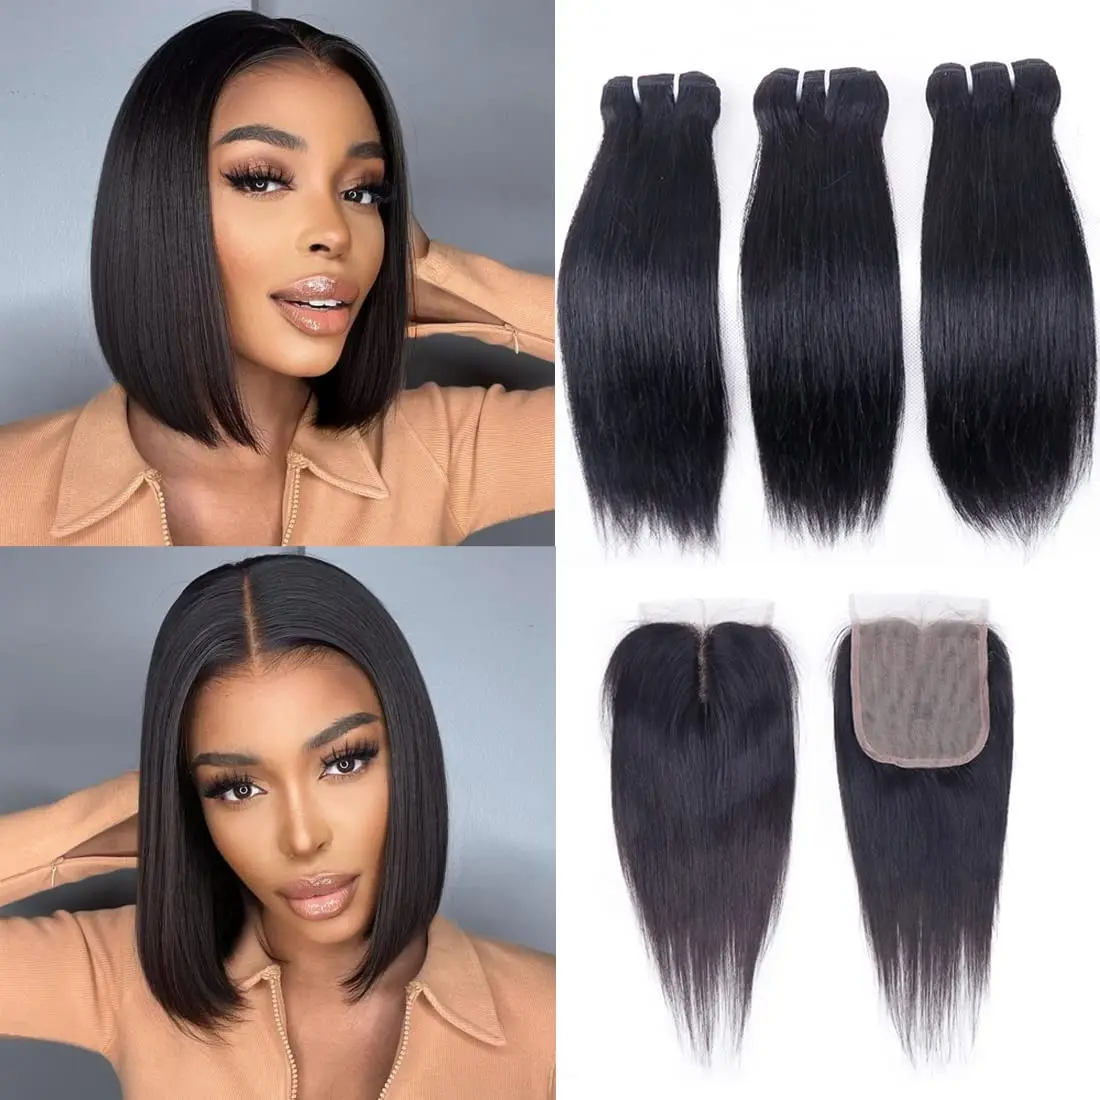 Brazilian Straight Human Hair Bundles Weave Extensions With Lace Frontal Closure 3/4 Bundles With Closure Remy Hairs  30 32 Inch